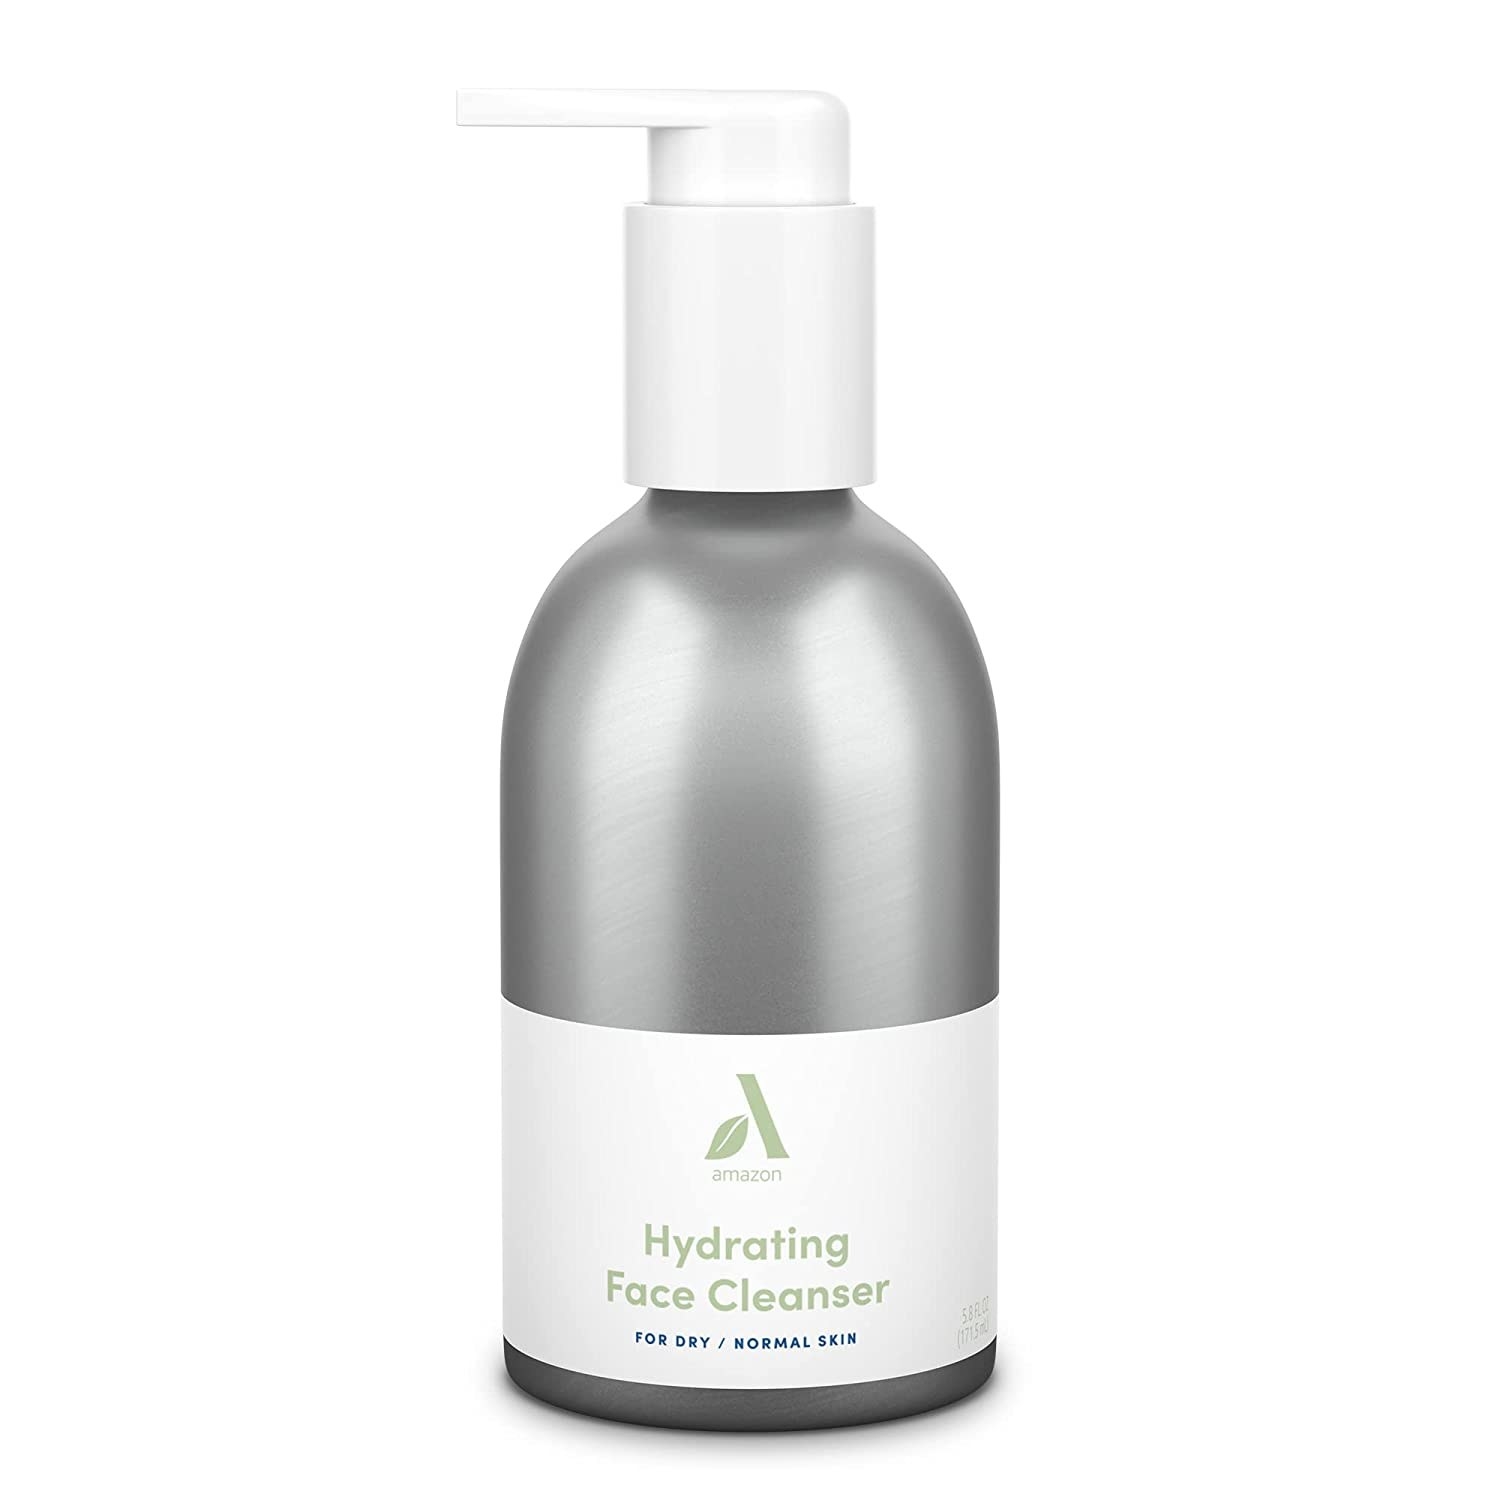 the aluminum bottle of hydrating cleanser